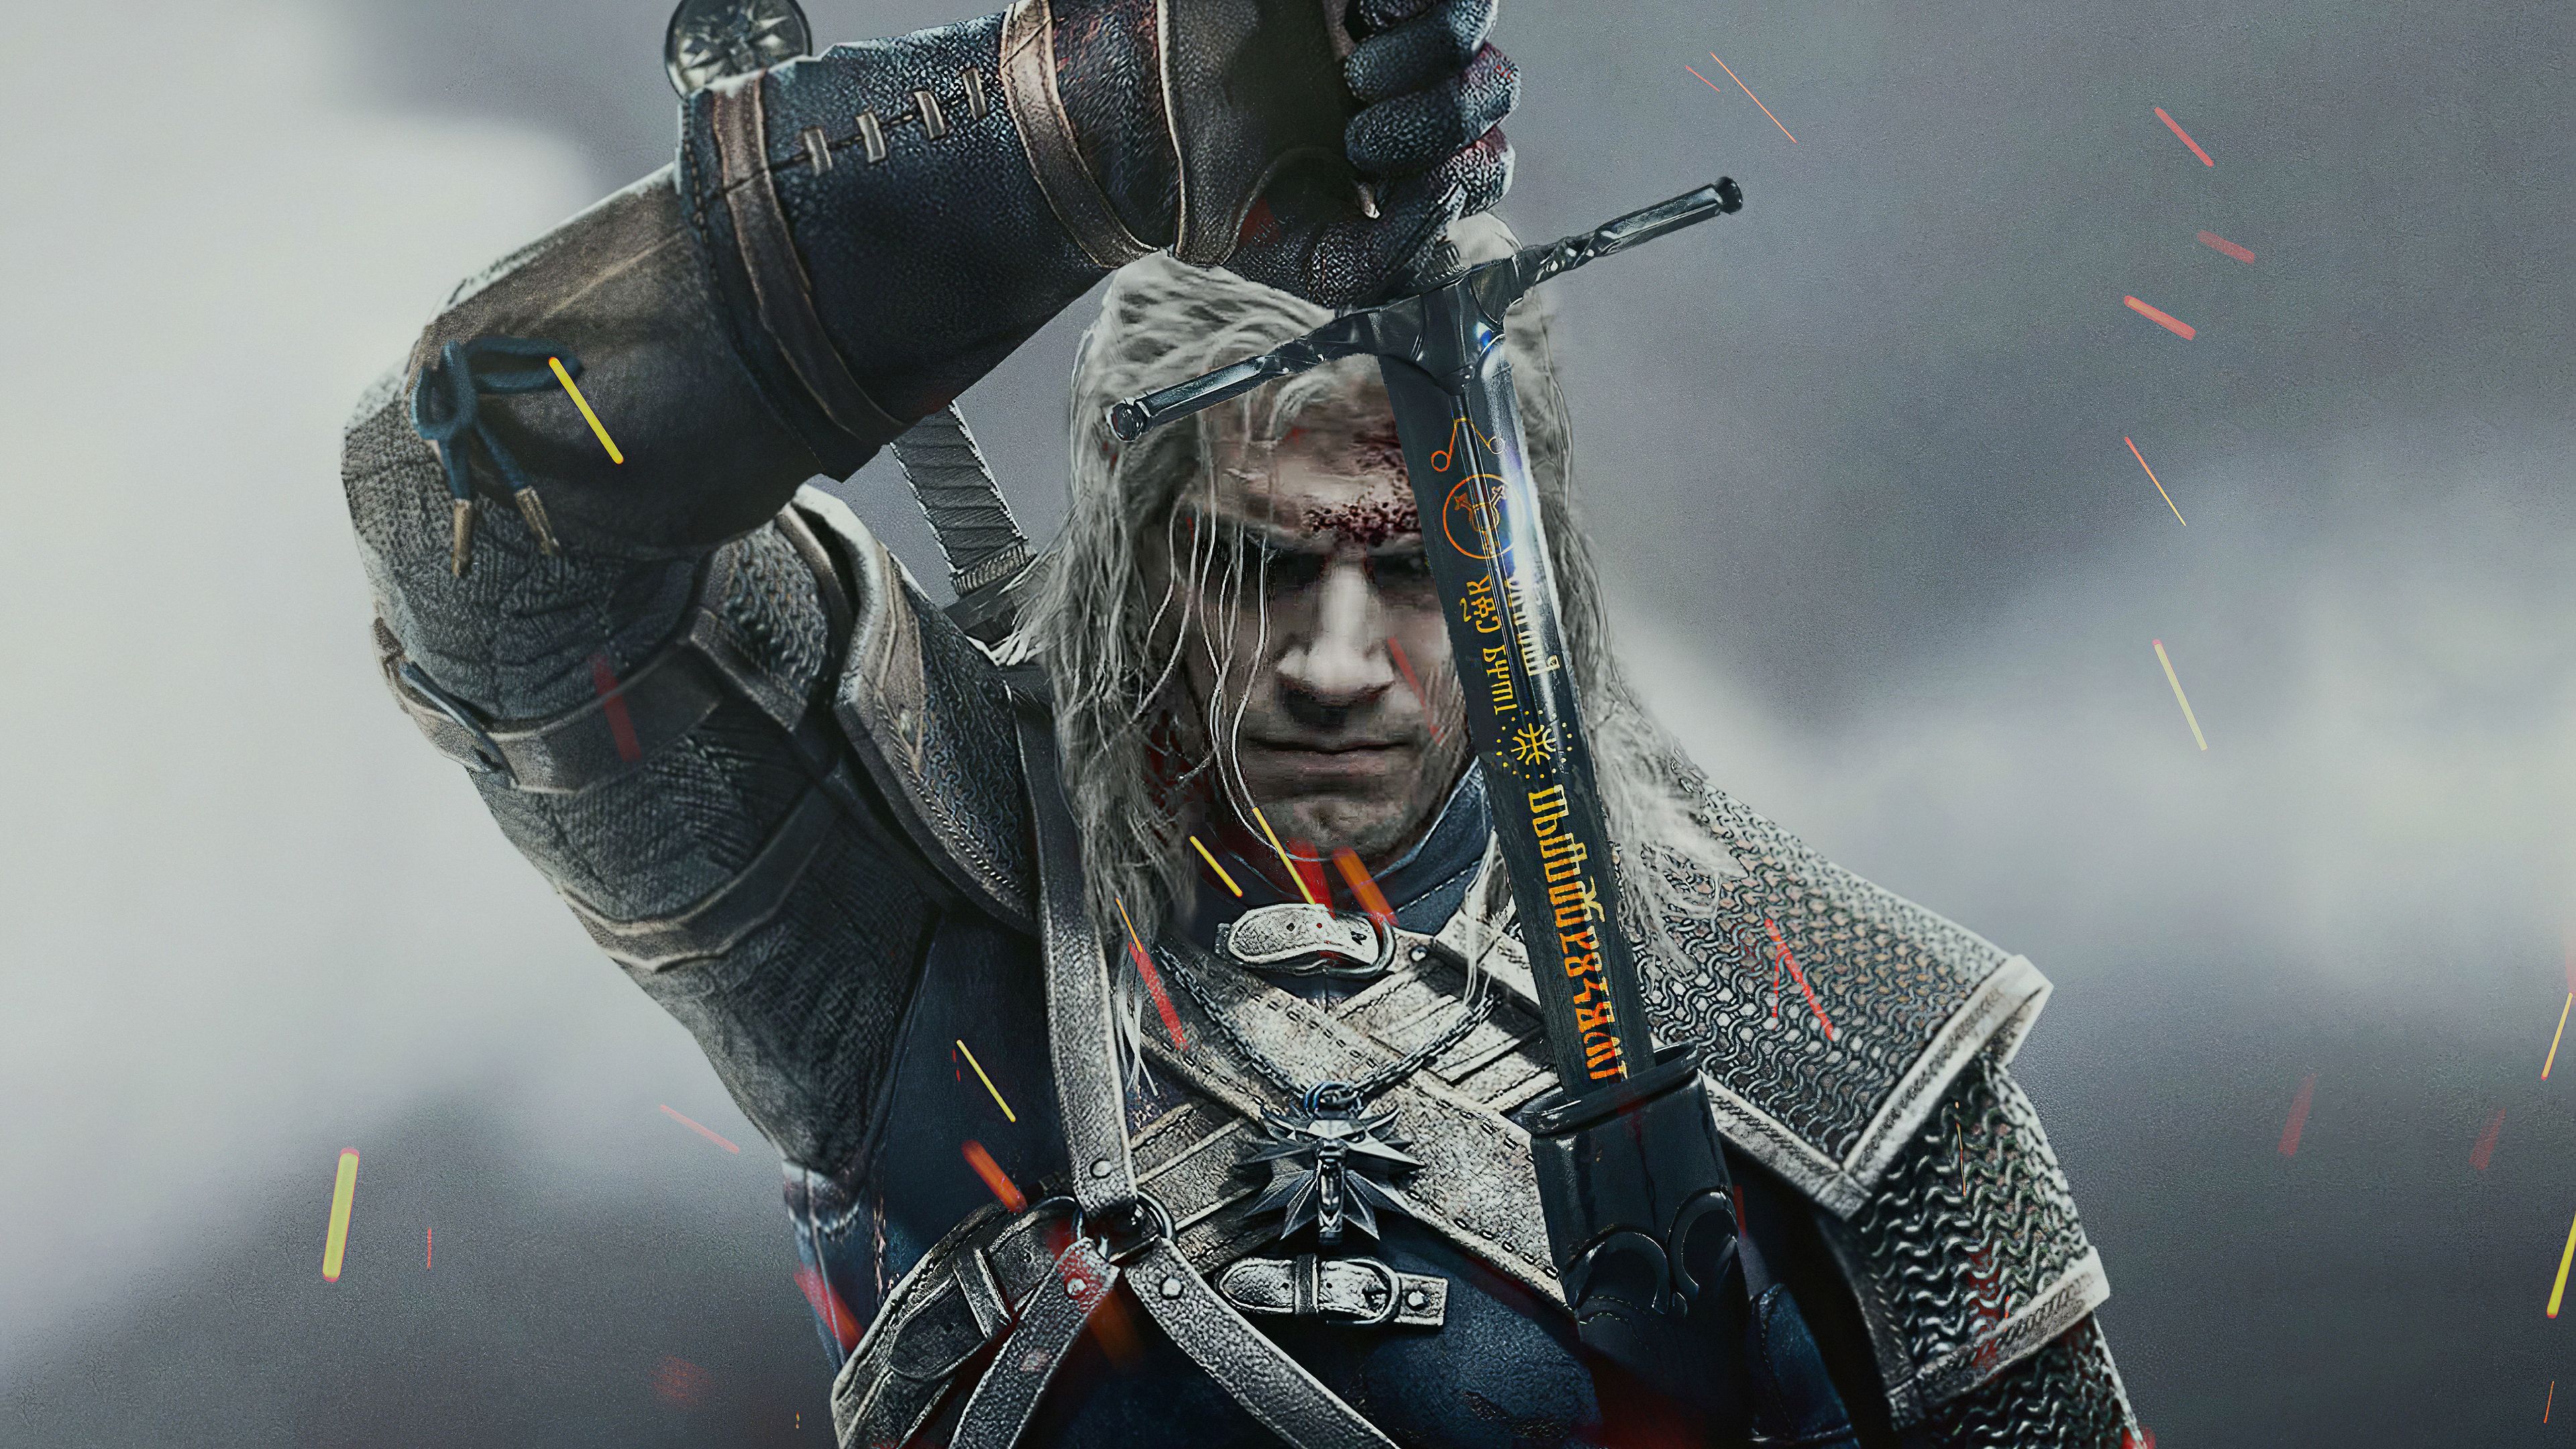 The Witcher Henry The Witcher HD wallpaper, The Witcher background HD 4k, The Witcher 4k wallpaper. The witcher, It cast, Netflix tv